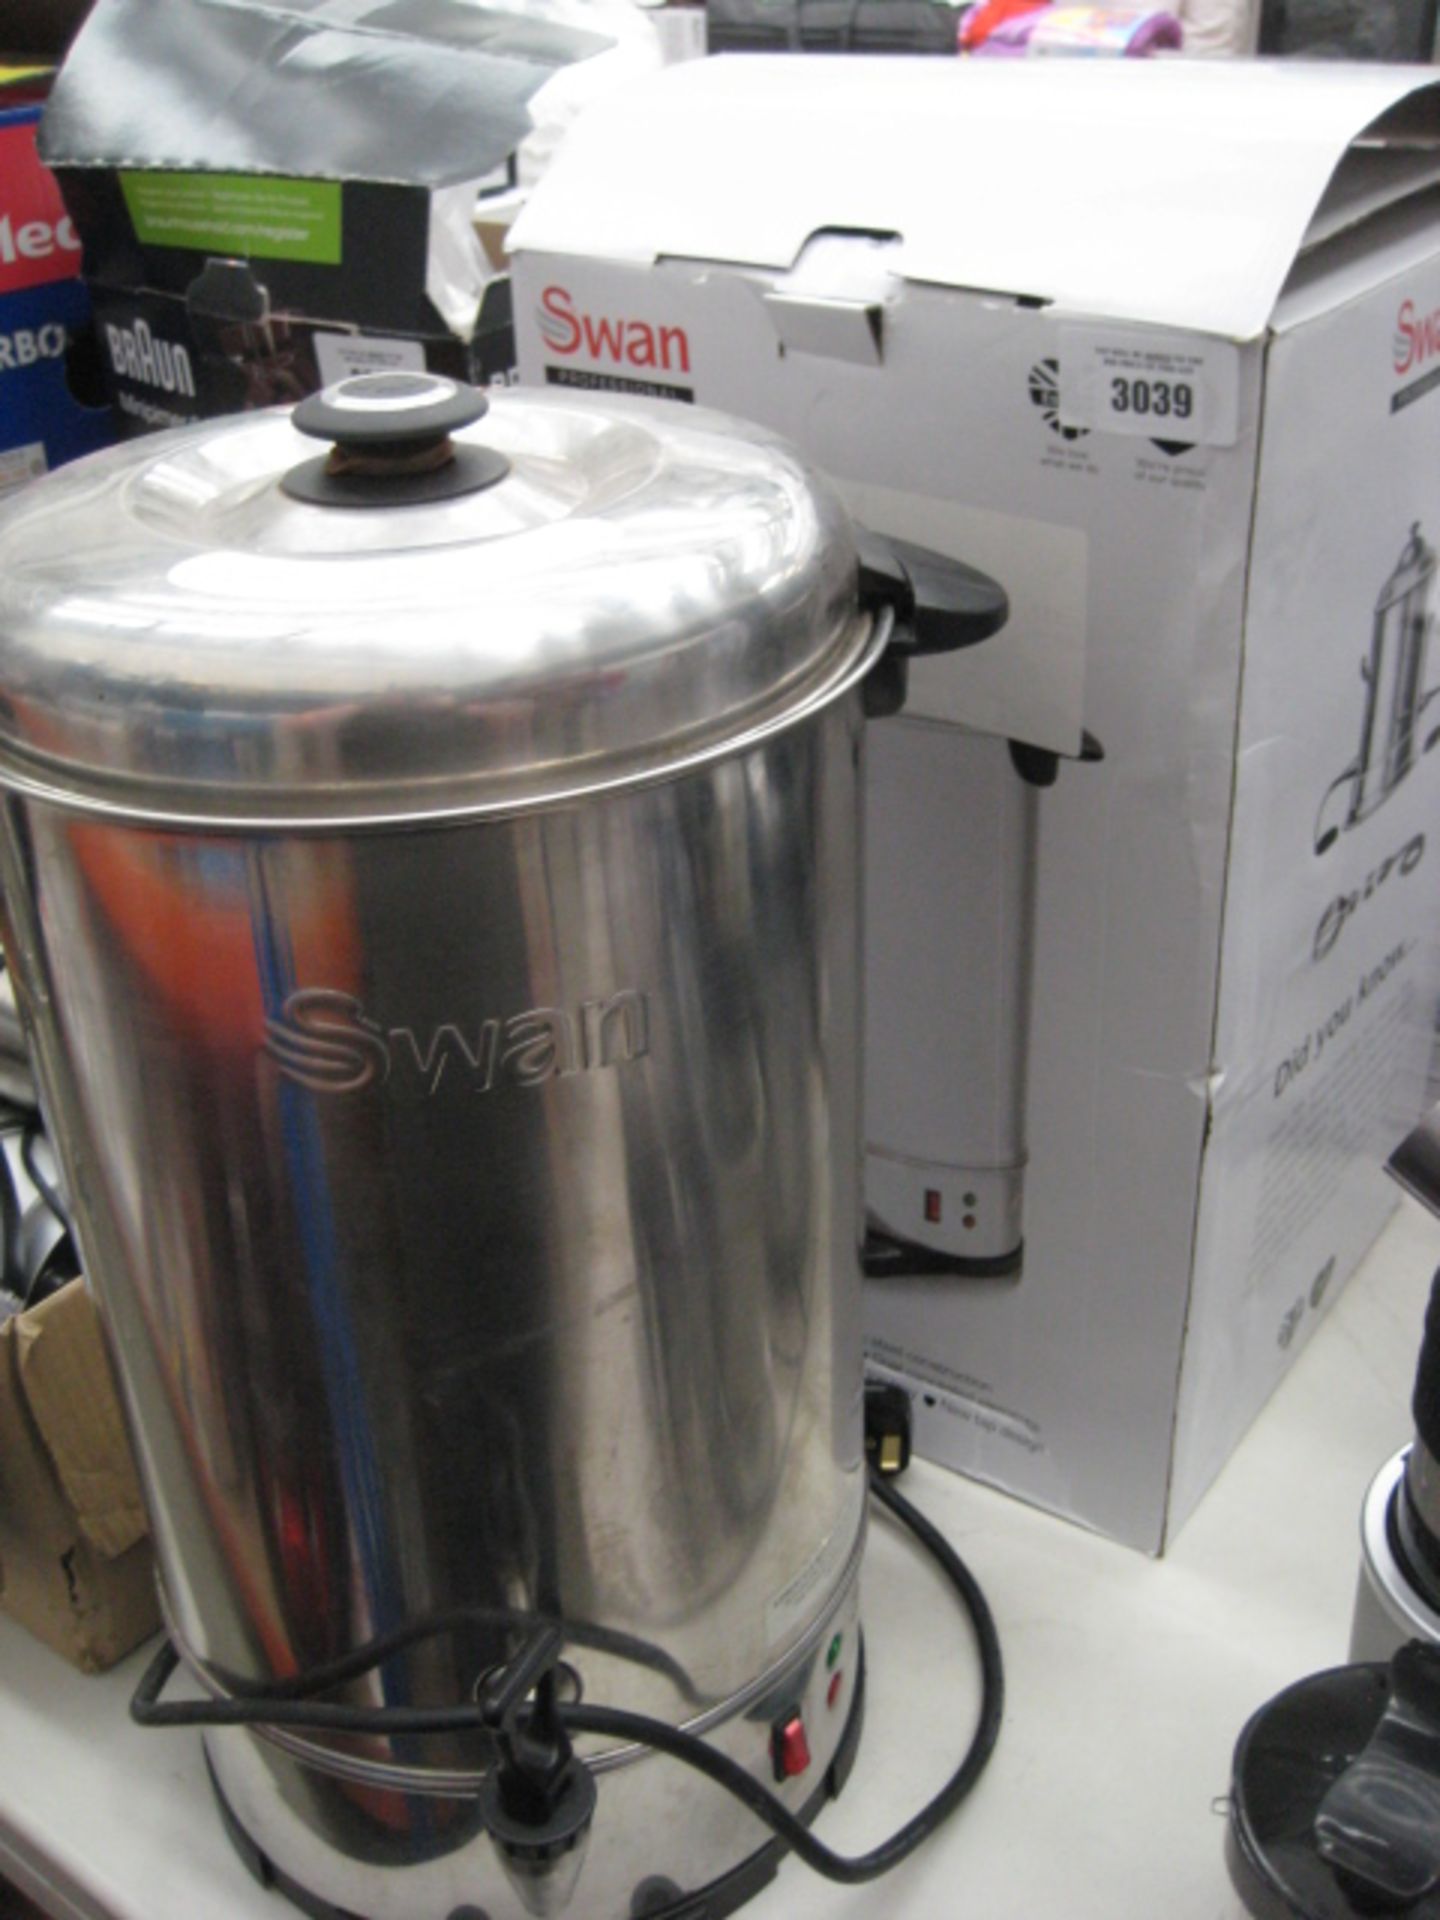 Boxed Swan water boiler urn plus another unboxed